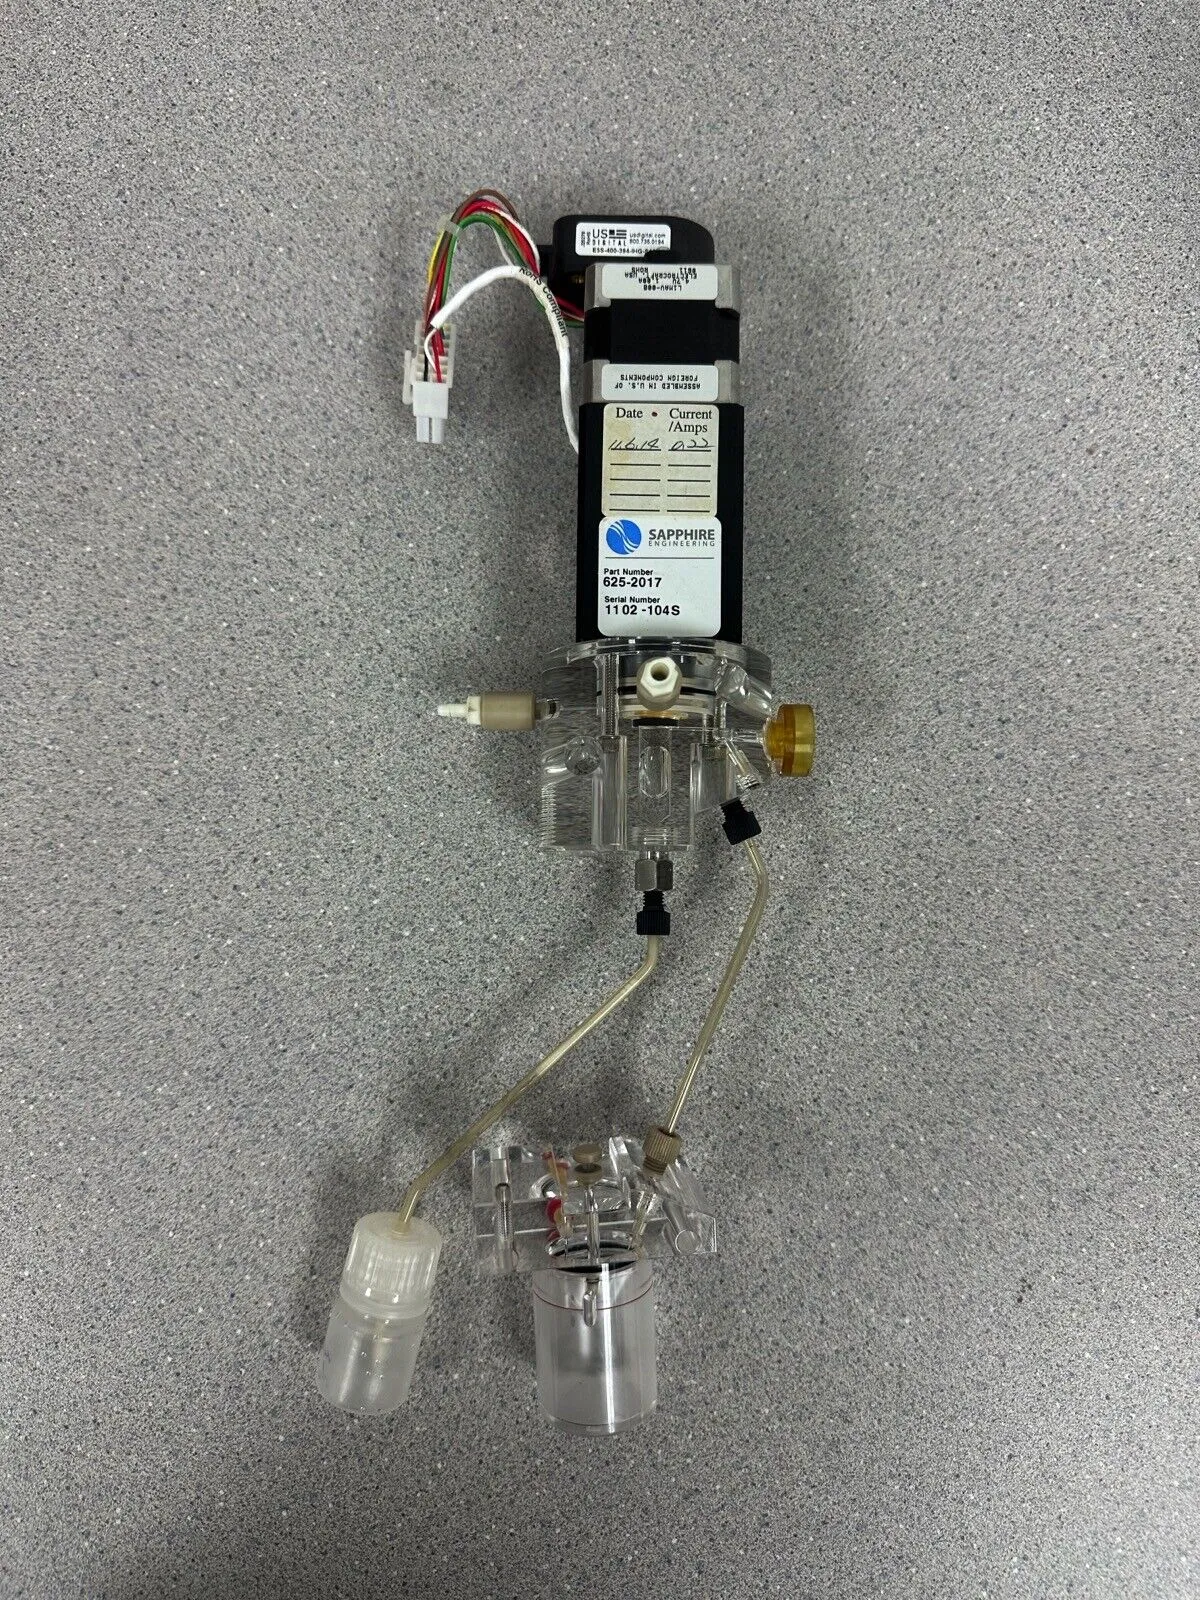 Sapphire Polymer Pump with attachments for ABI 3130/3730 Genetic Analyzer